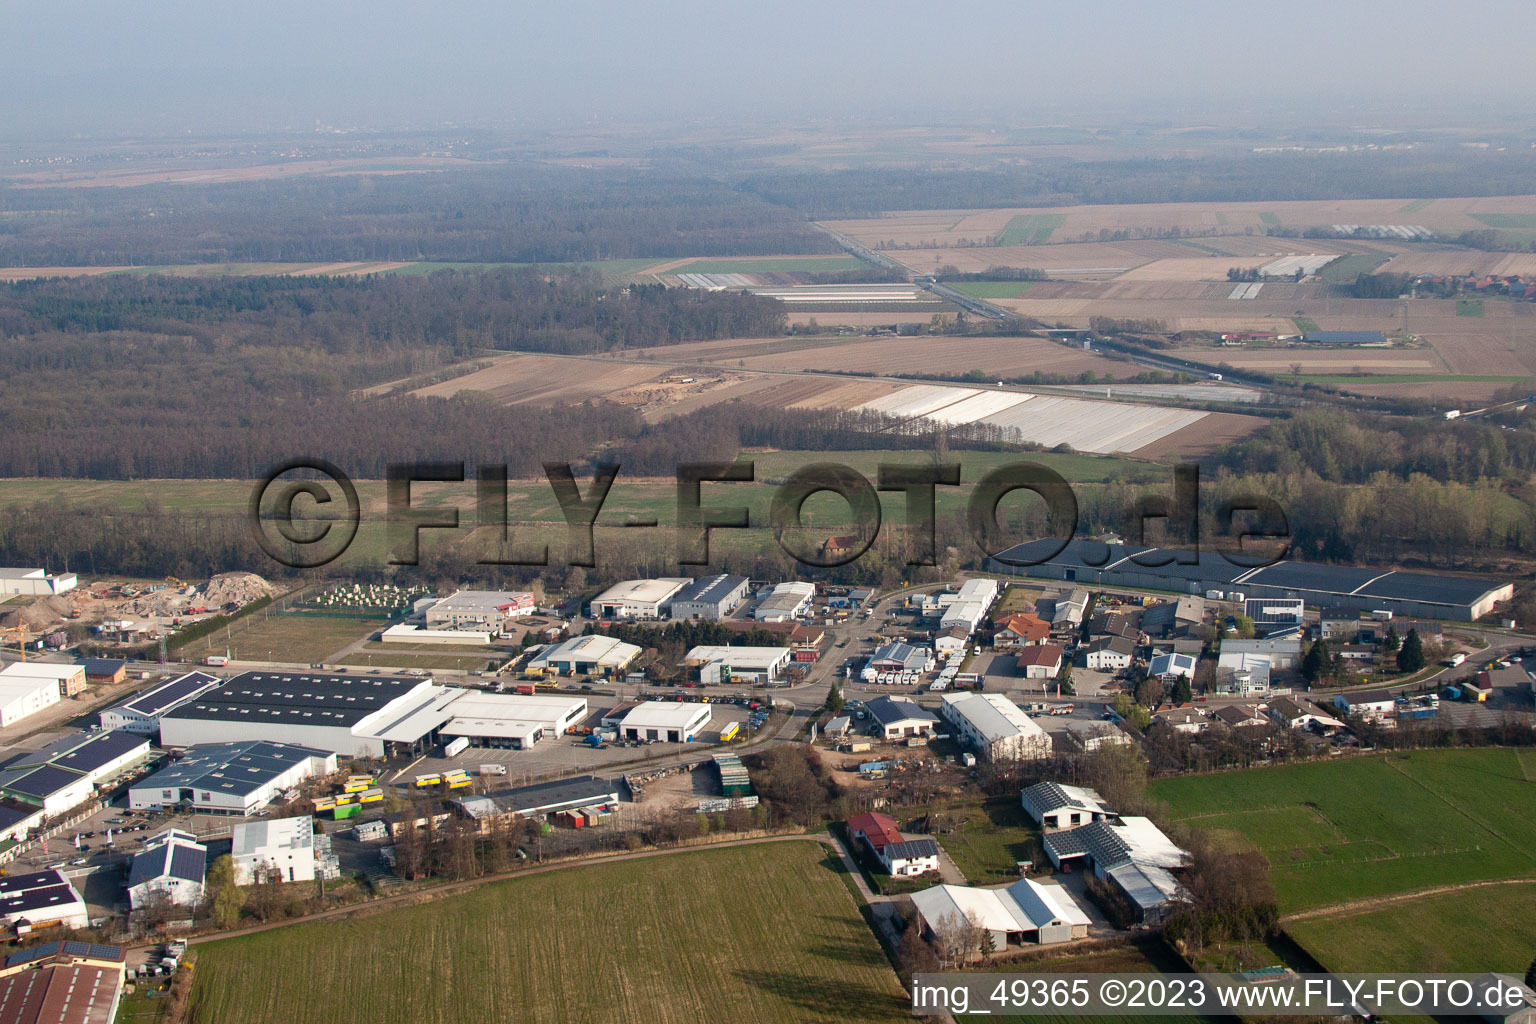 Horst industrial area in the district Minderslachen in Kandel in the state Rhineland-Palatinate, Germany seen from above